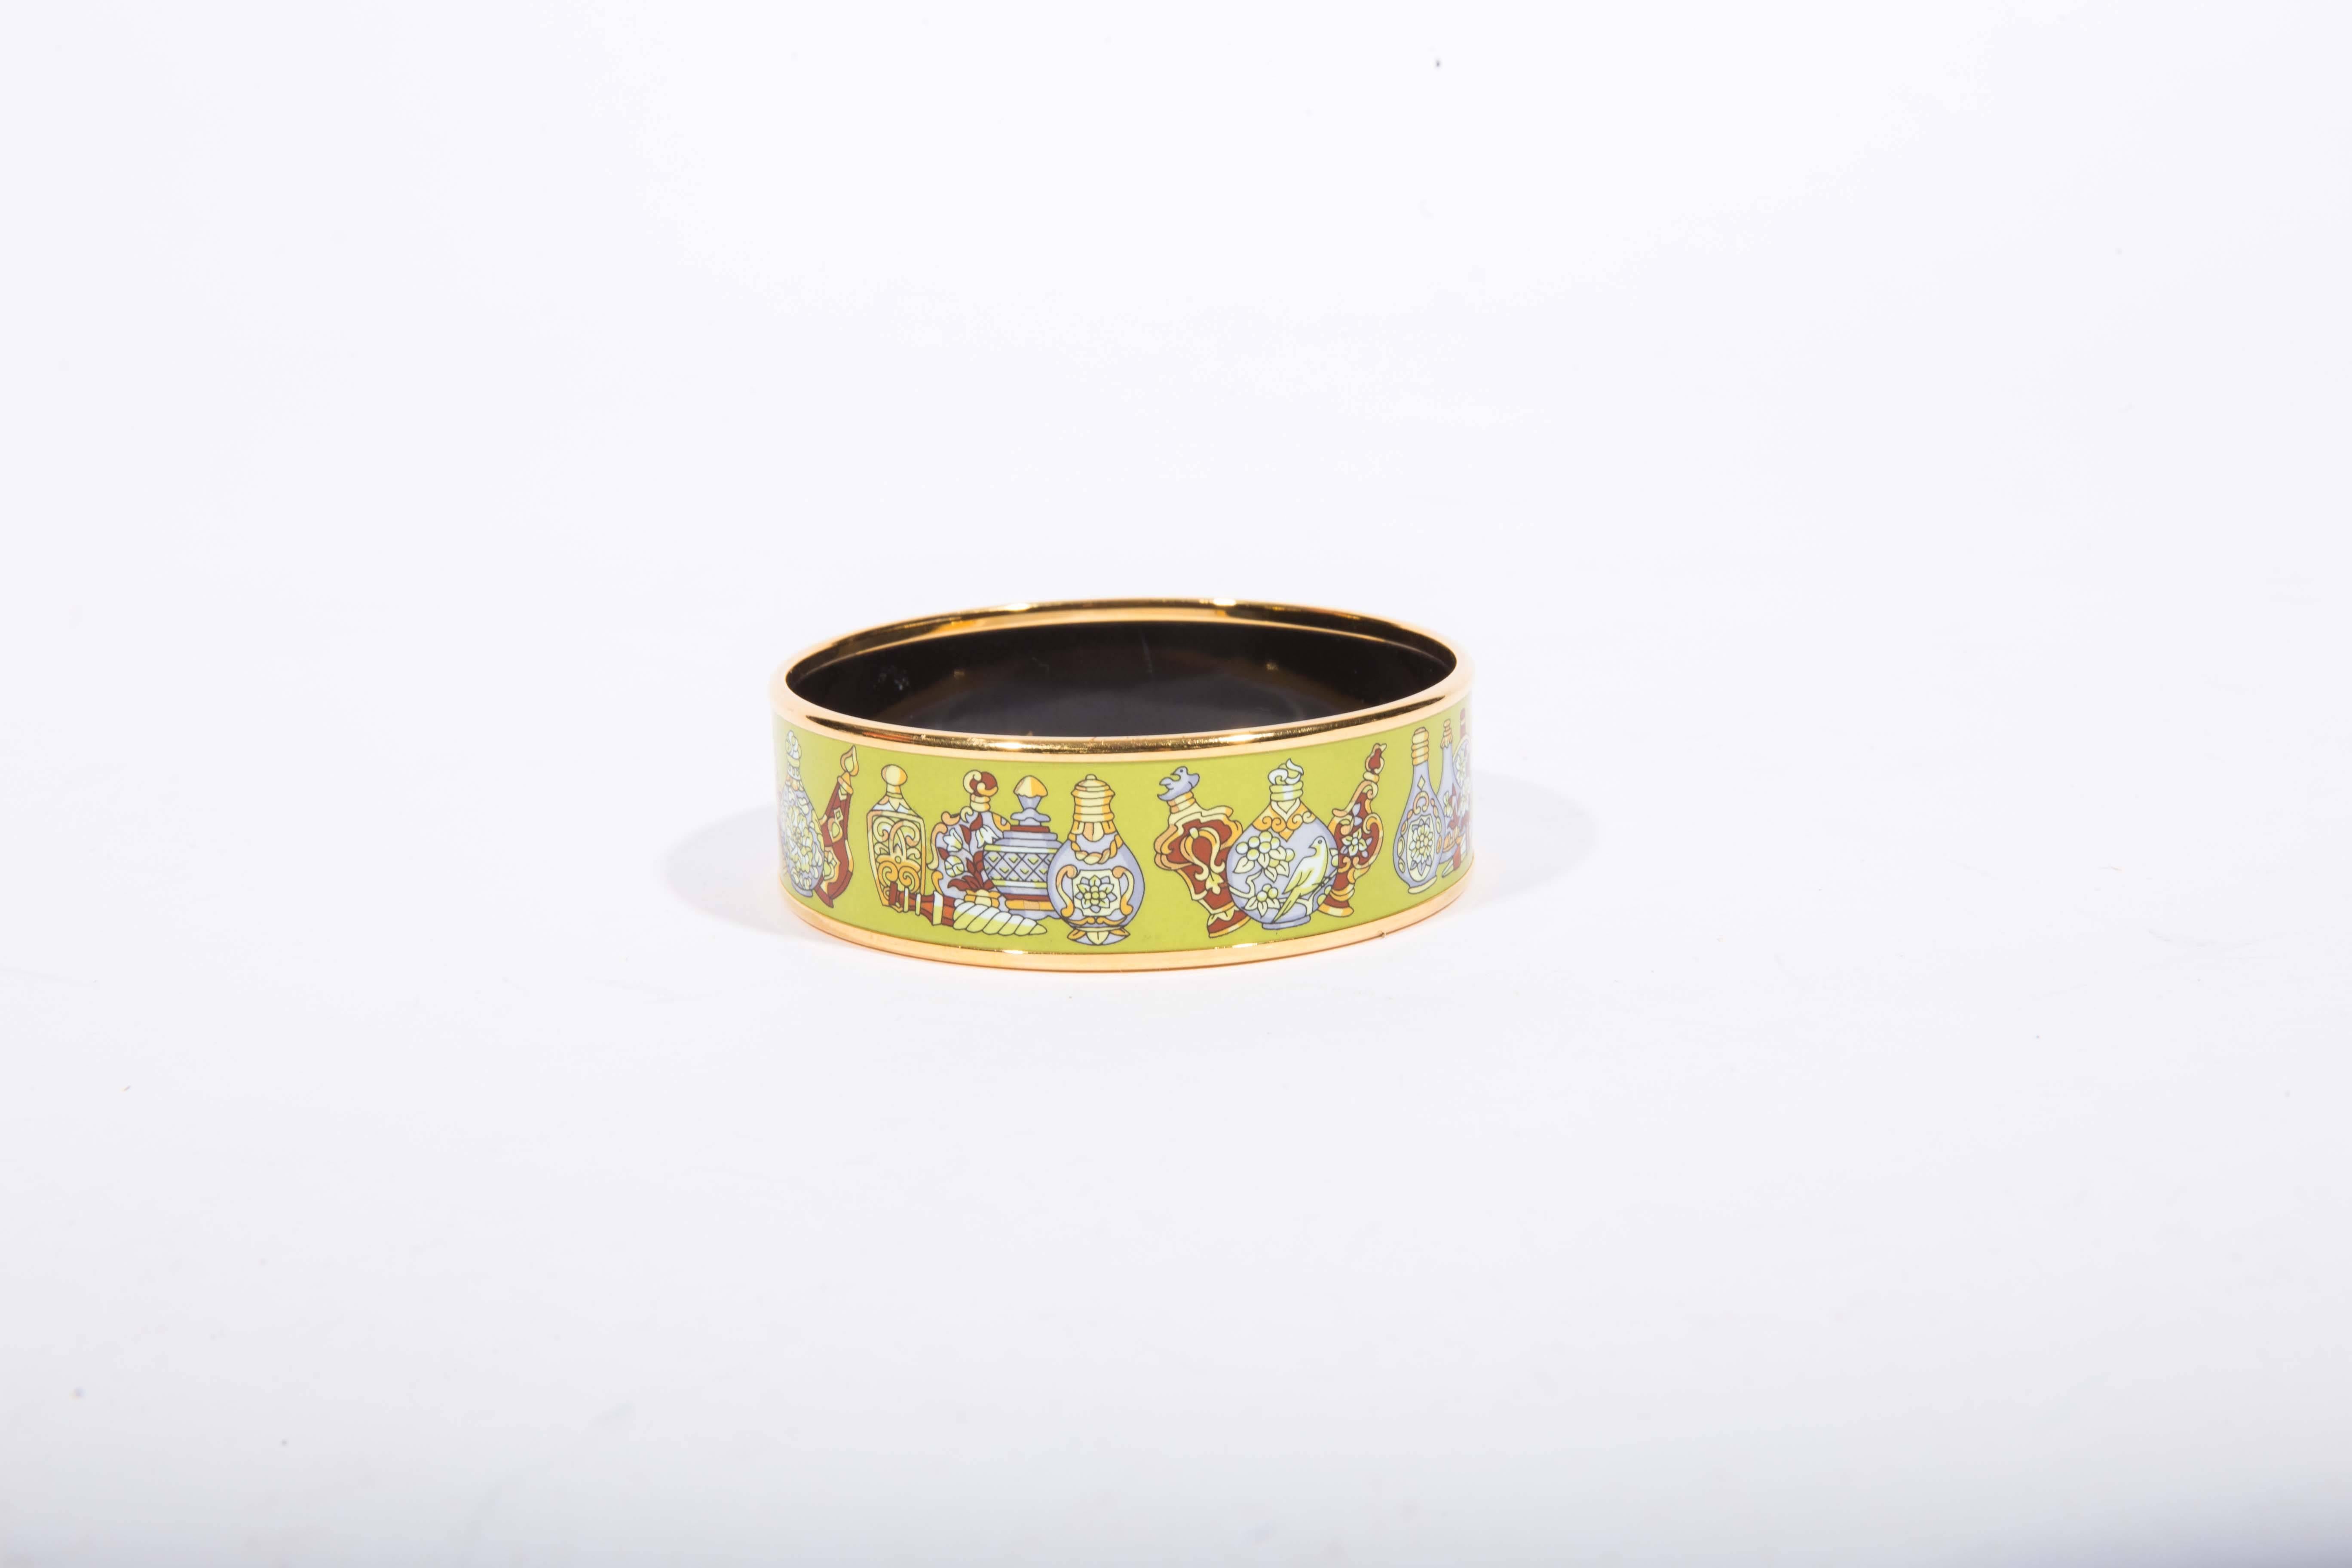 Stunning Hermes Enamel Perfume Bottle Bangle with gold tone trim. This bracelet is 3/4 inches in width with a circumference of 8 1/4 inches. The letter N denotes the year 2010. The bracelet color is predominately pistachio green with  yellow, white